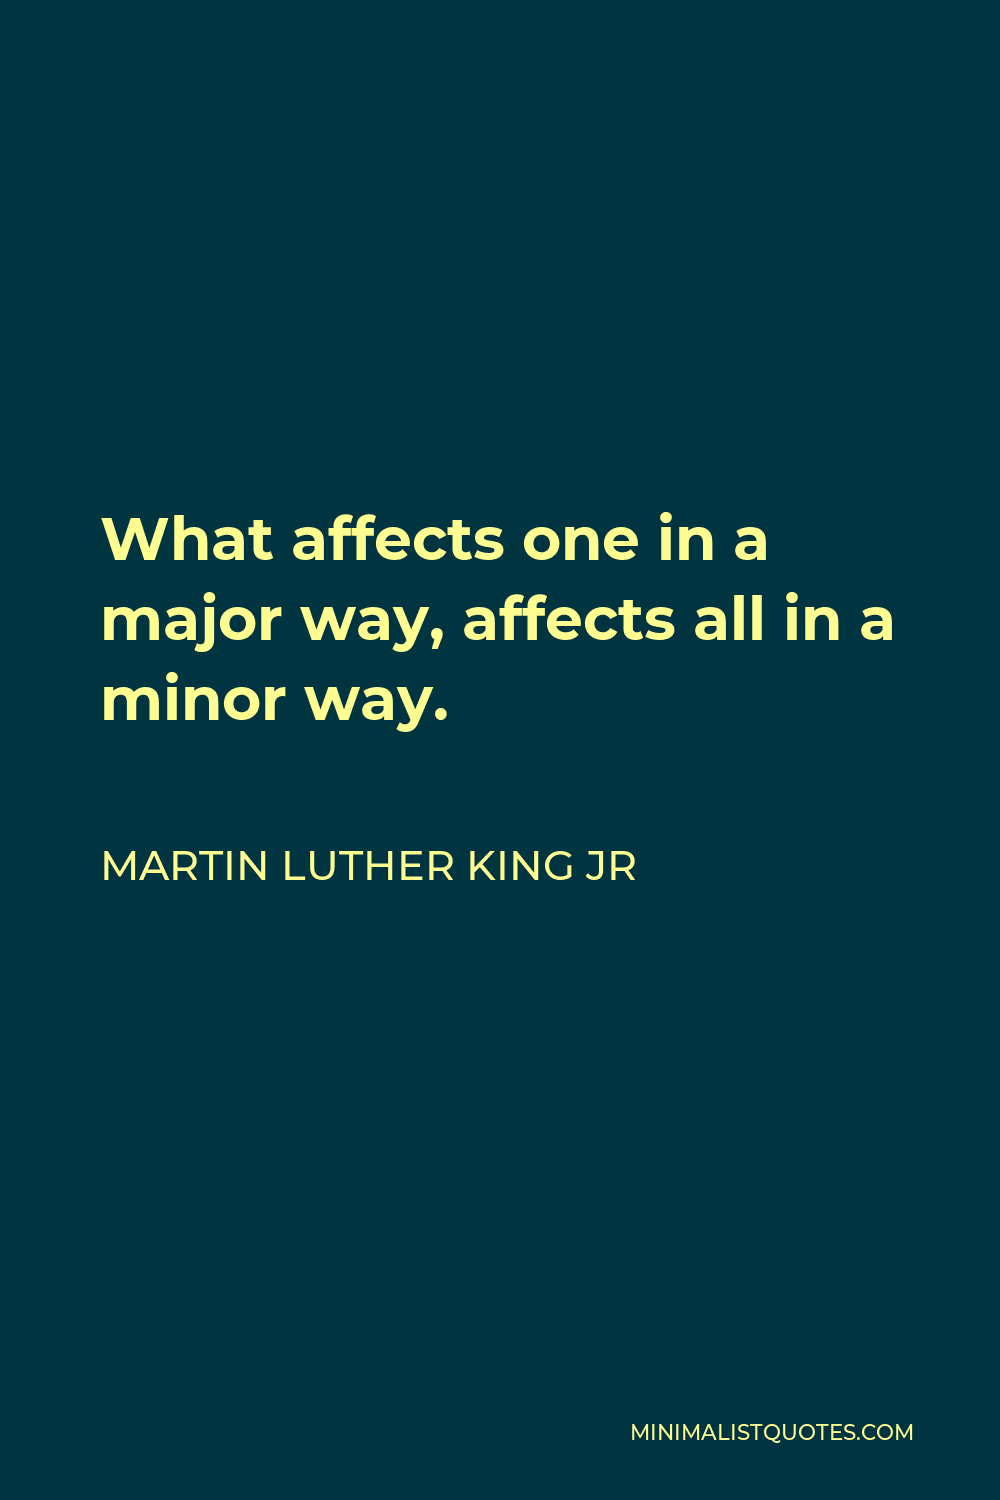 Martin Luther King Jr Quote - What affects one in a major way, affects all in a minor way.